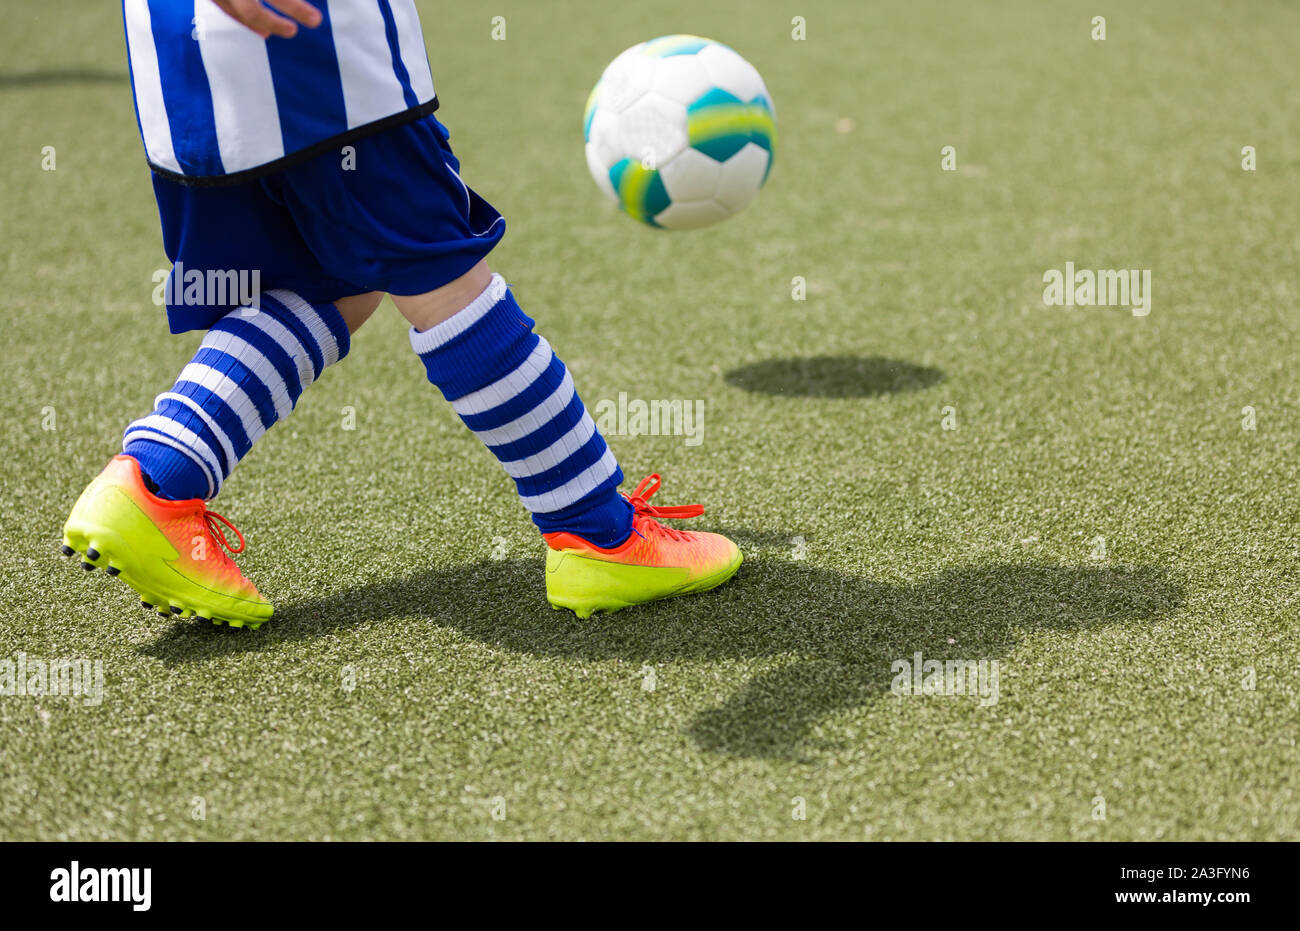 young boy playing soccer on artificial turf Stock Photo